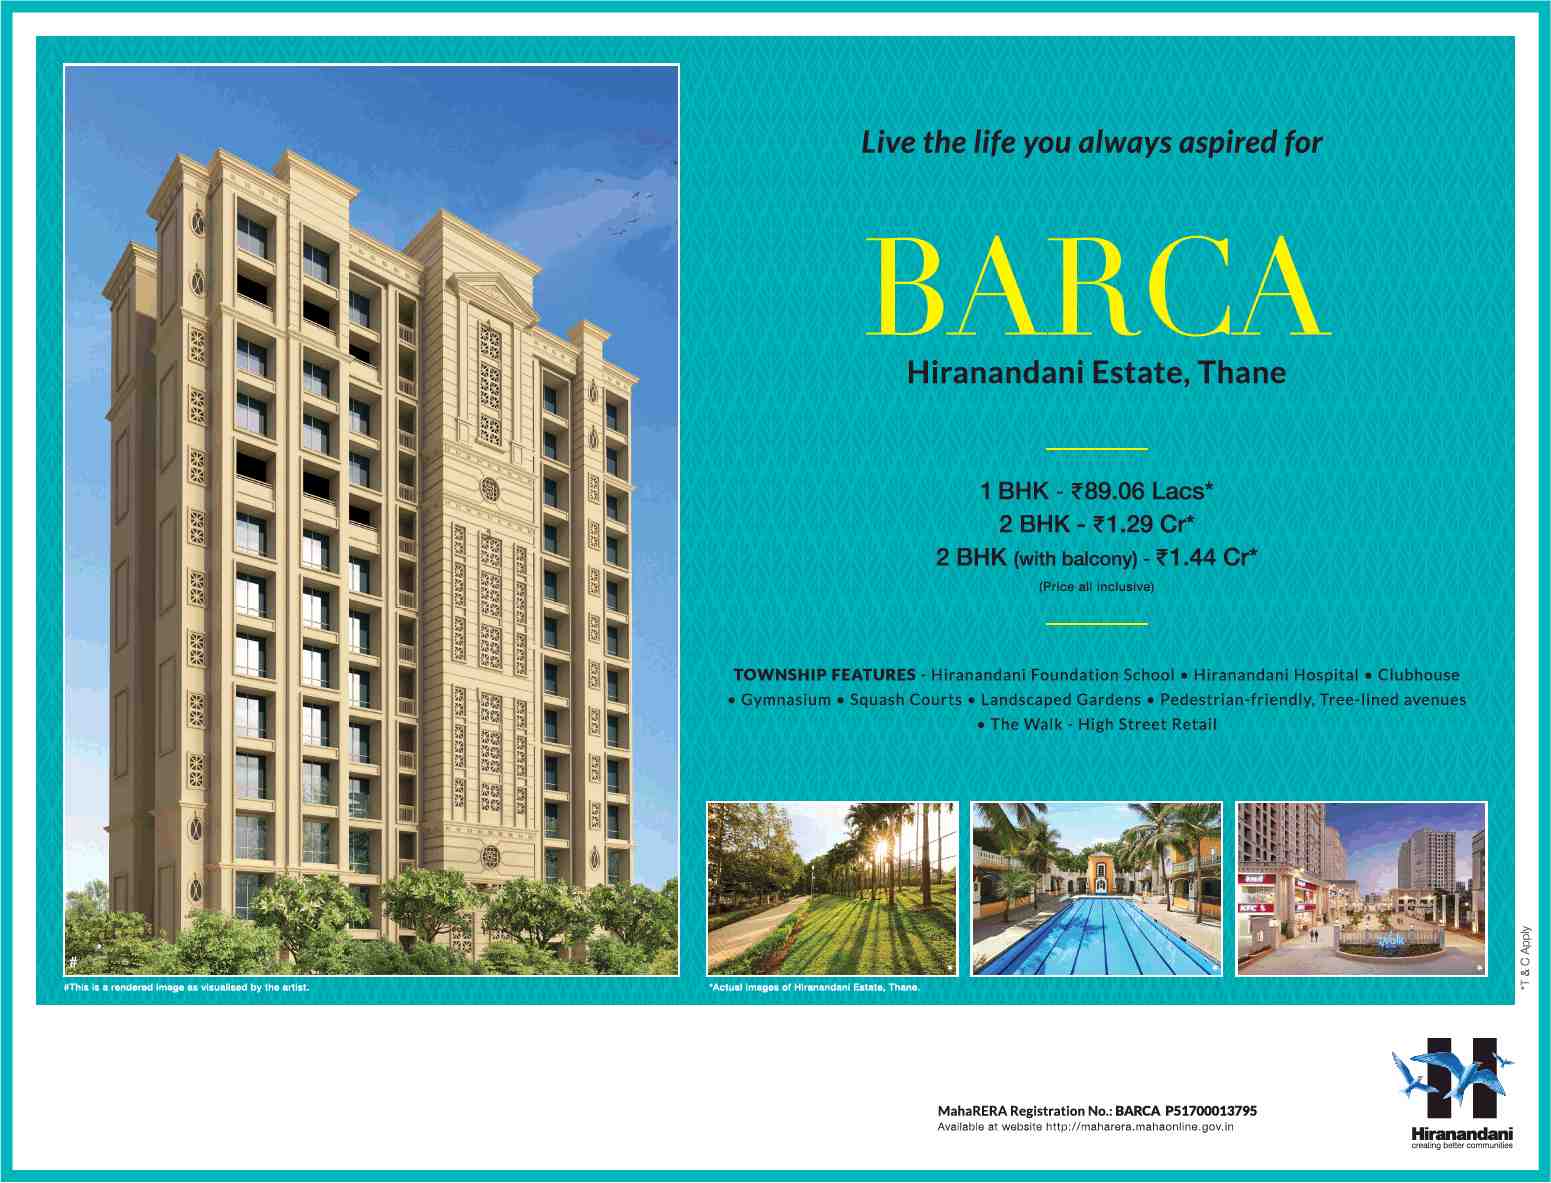 Live the life you always aspired for at Hiranandani Estate Barca in Mumbai